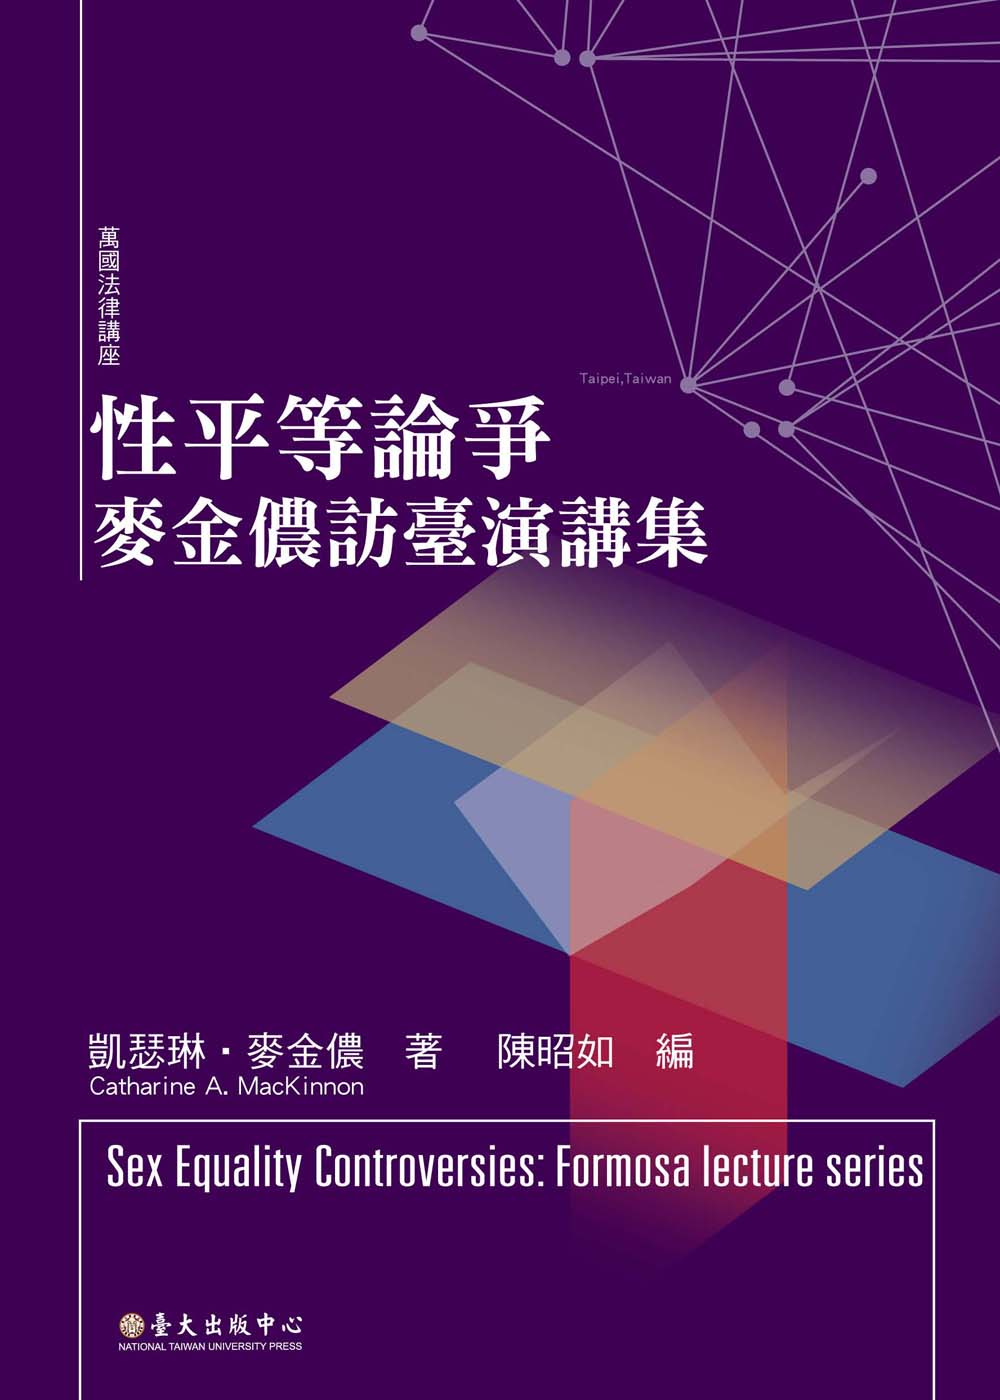 Sex Equality Controversies: Formosa lecture series, 2013